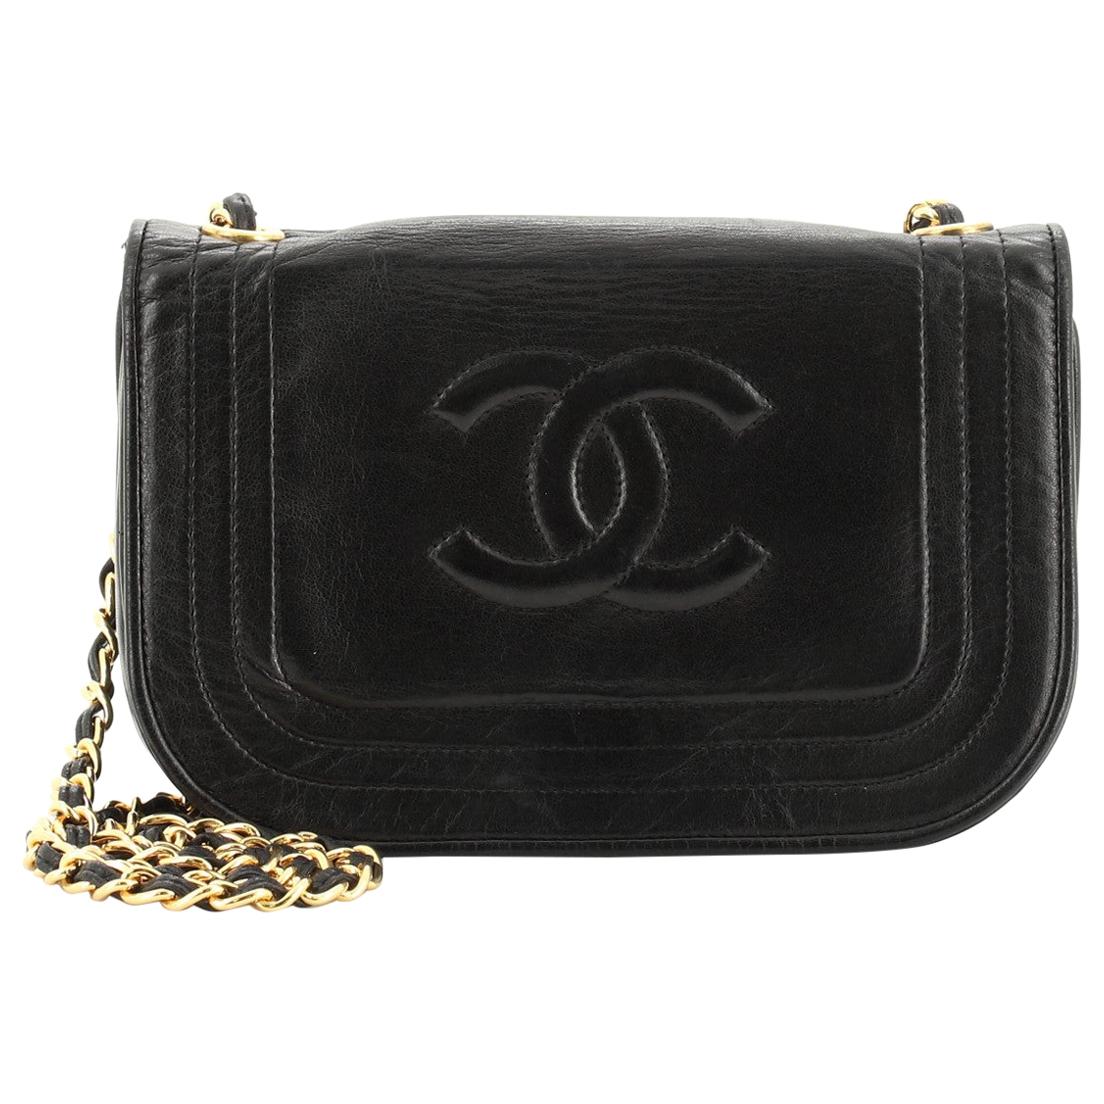 Authentic CHANEL Lambskin Leather CC Bias Stitch in Black